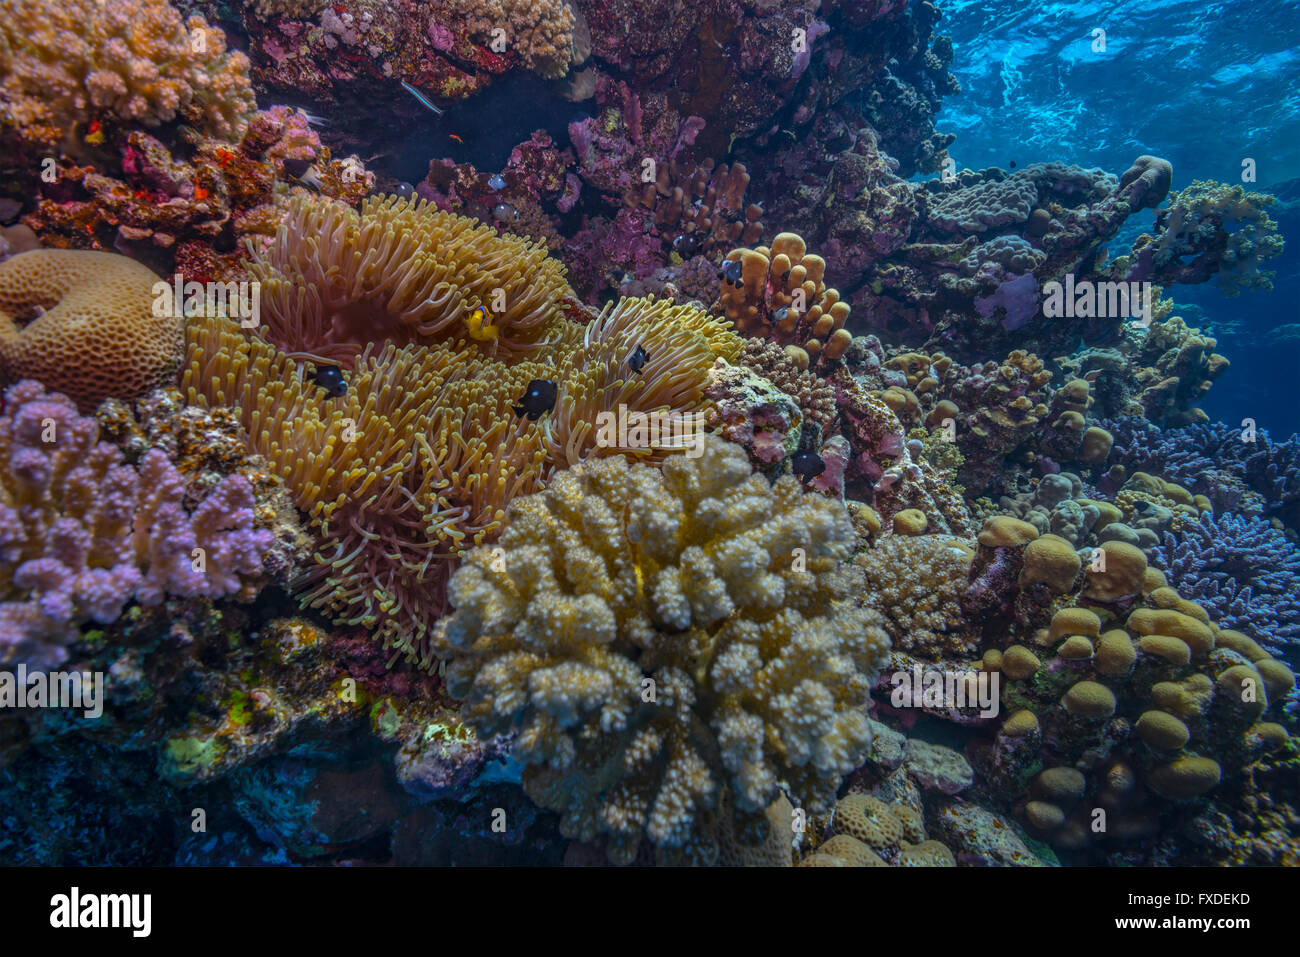 An adult anemonefish with young family amongst a magnificent sea anemone on a coral reef in the Red Sea. Stock Photo